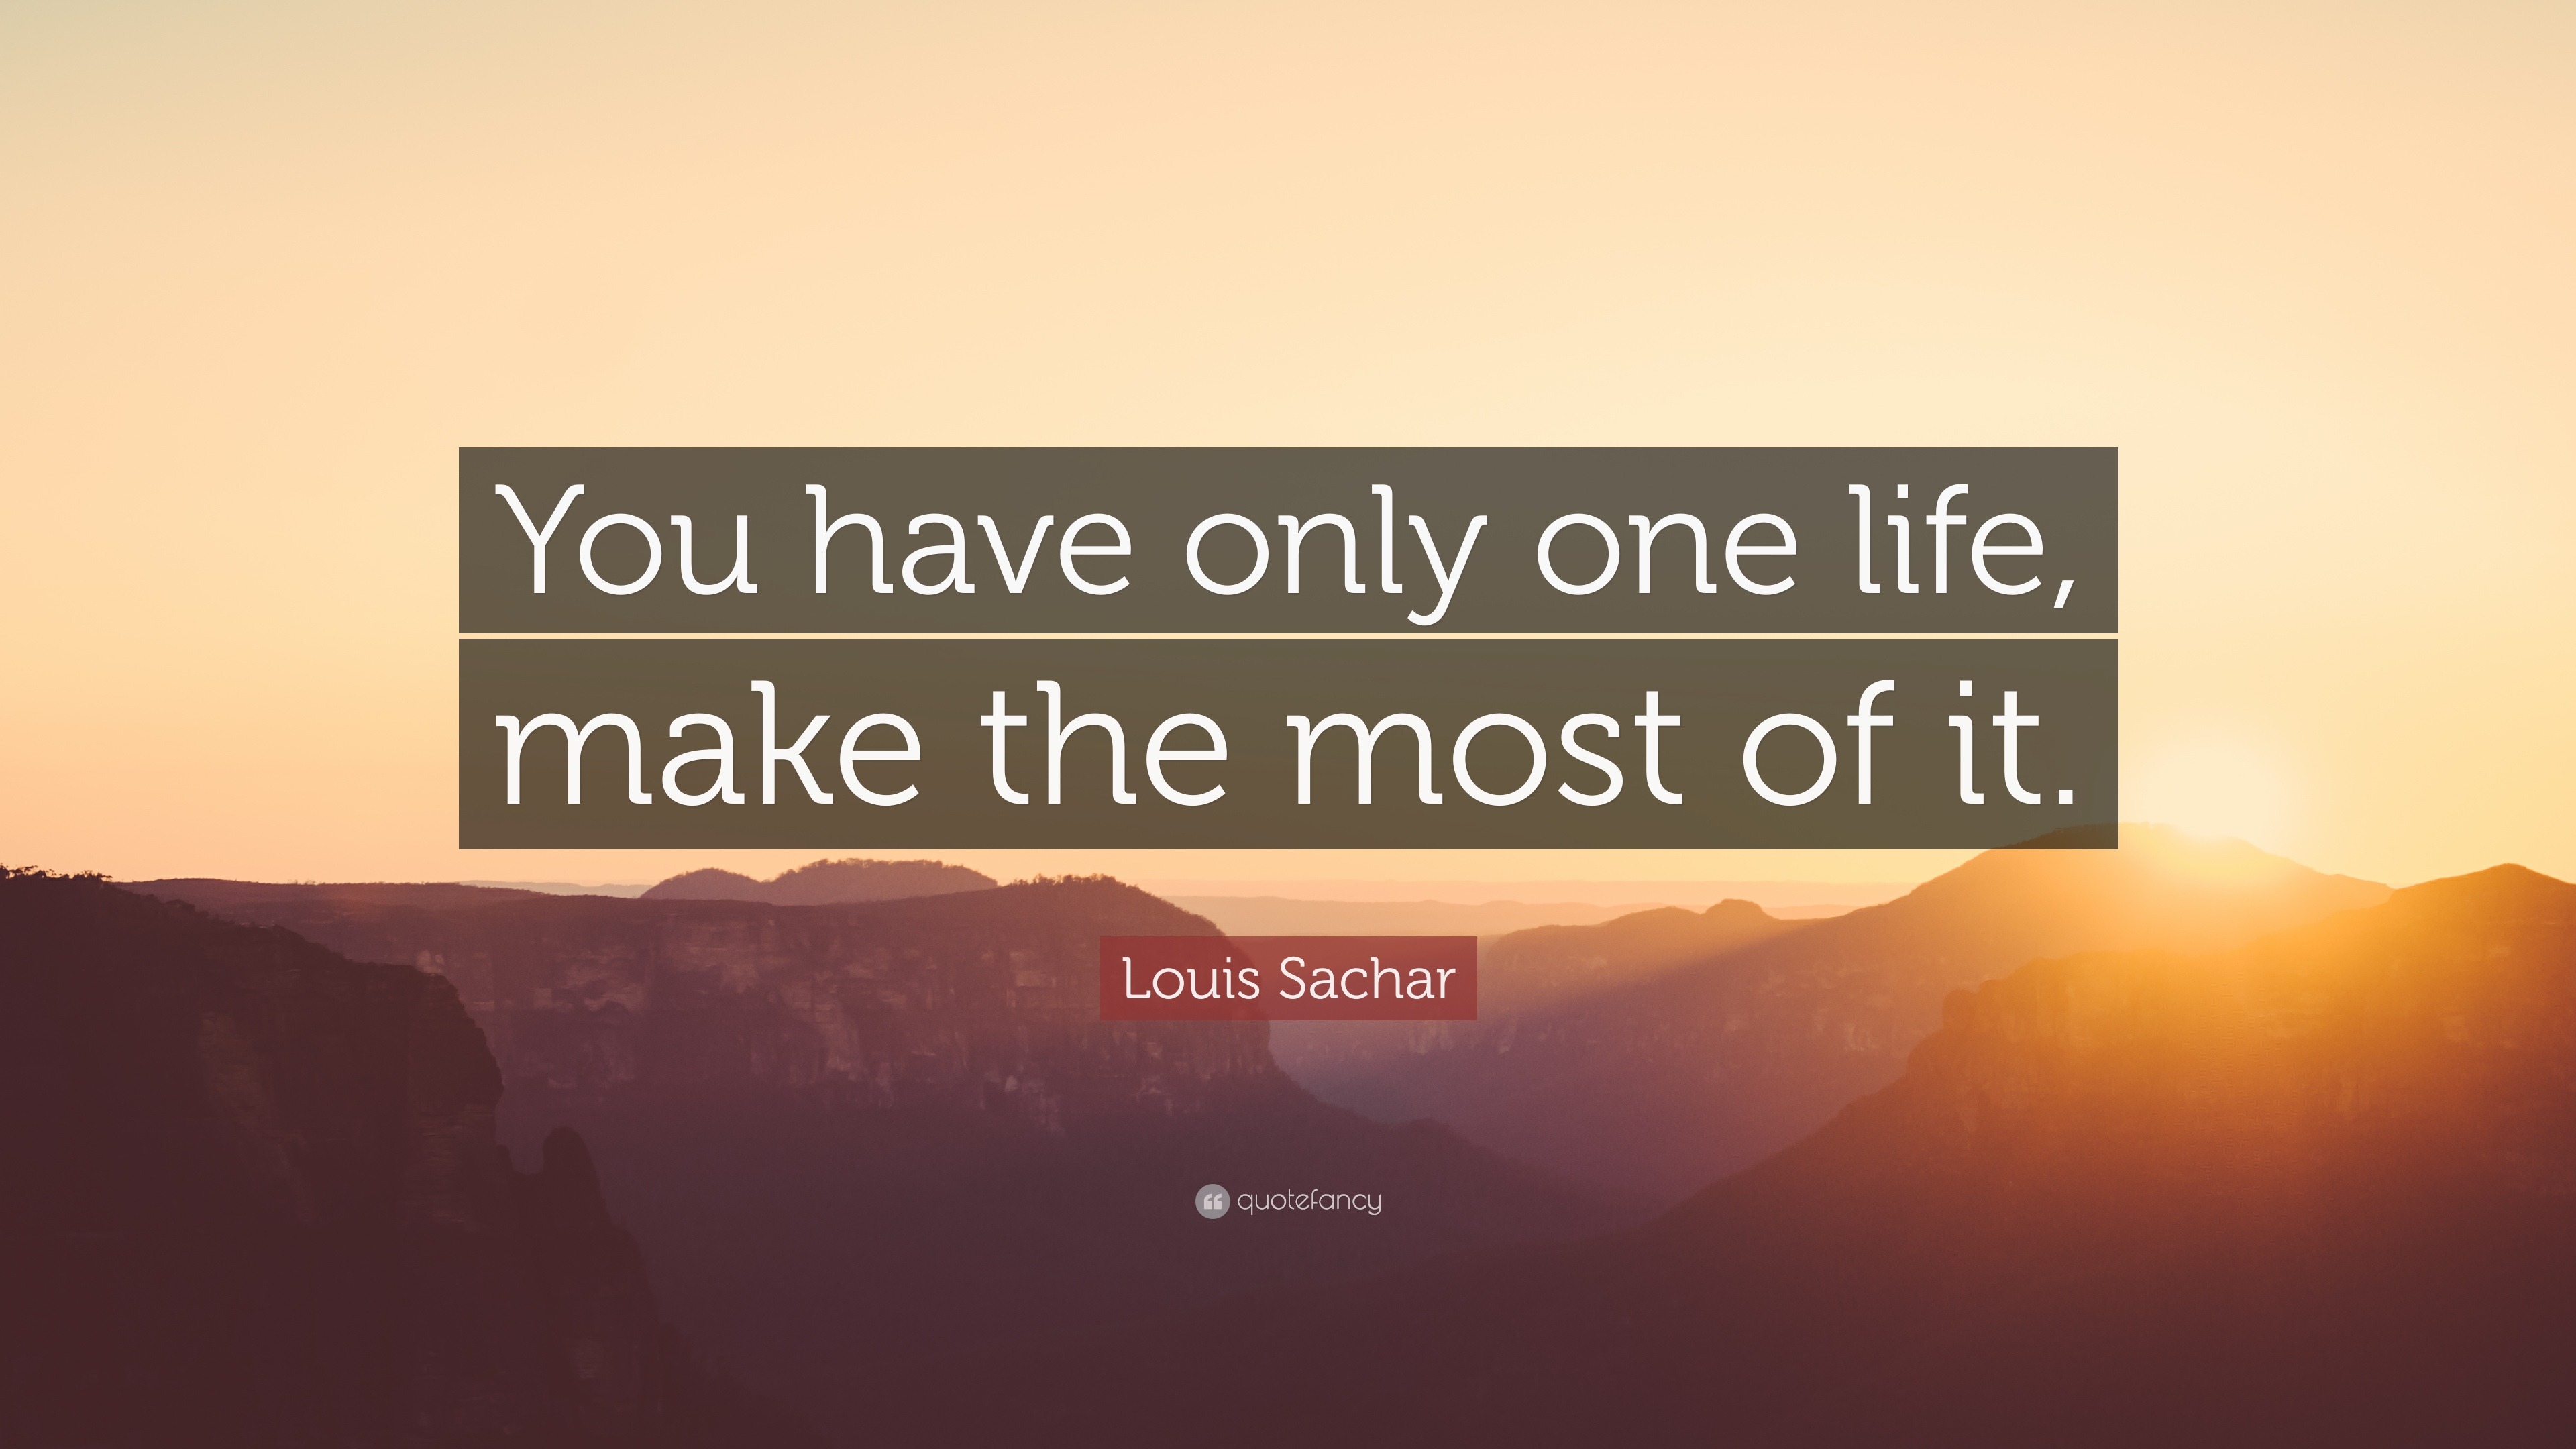 Louis Sachar Quote “You have only one life make the most of it